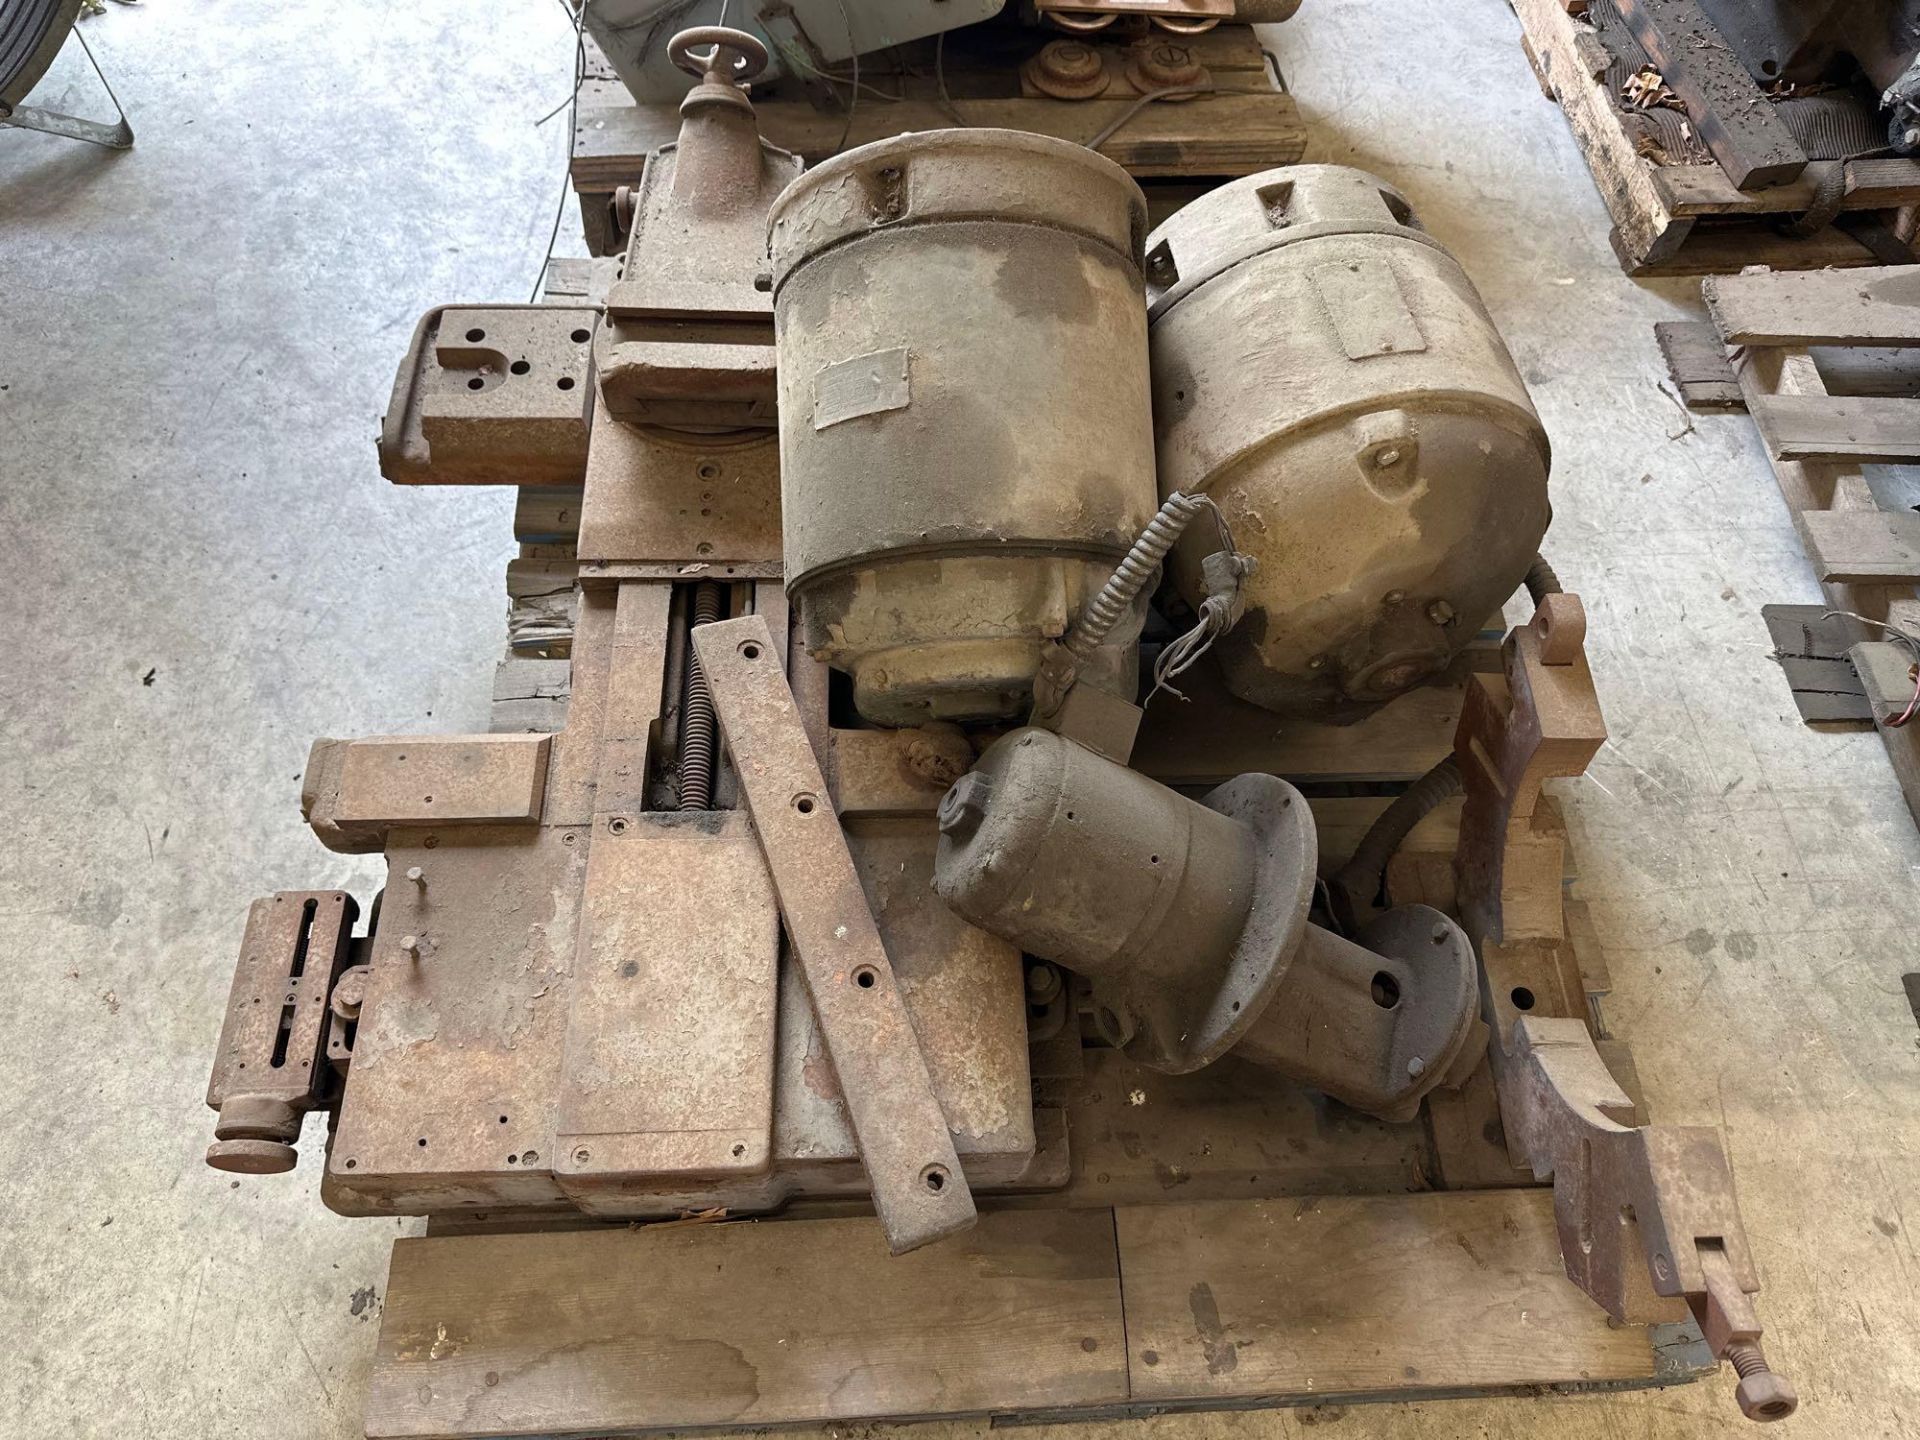 Lot of 14 Pallets of Axelson Parts: Motors, Gear Boxes, Steady Rests, Tail Stocks, Electrical Cabine - Image 6 of 31